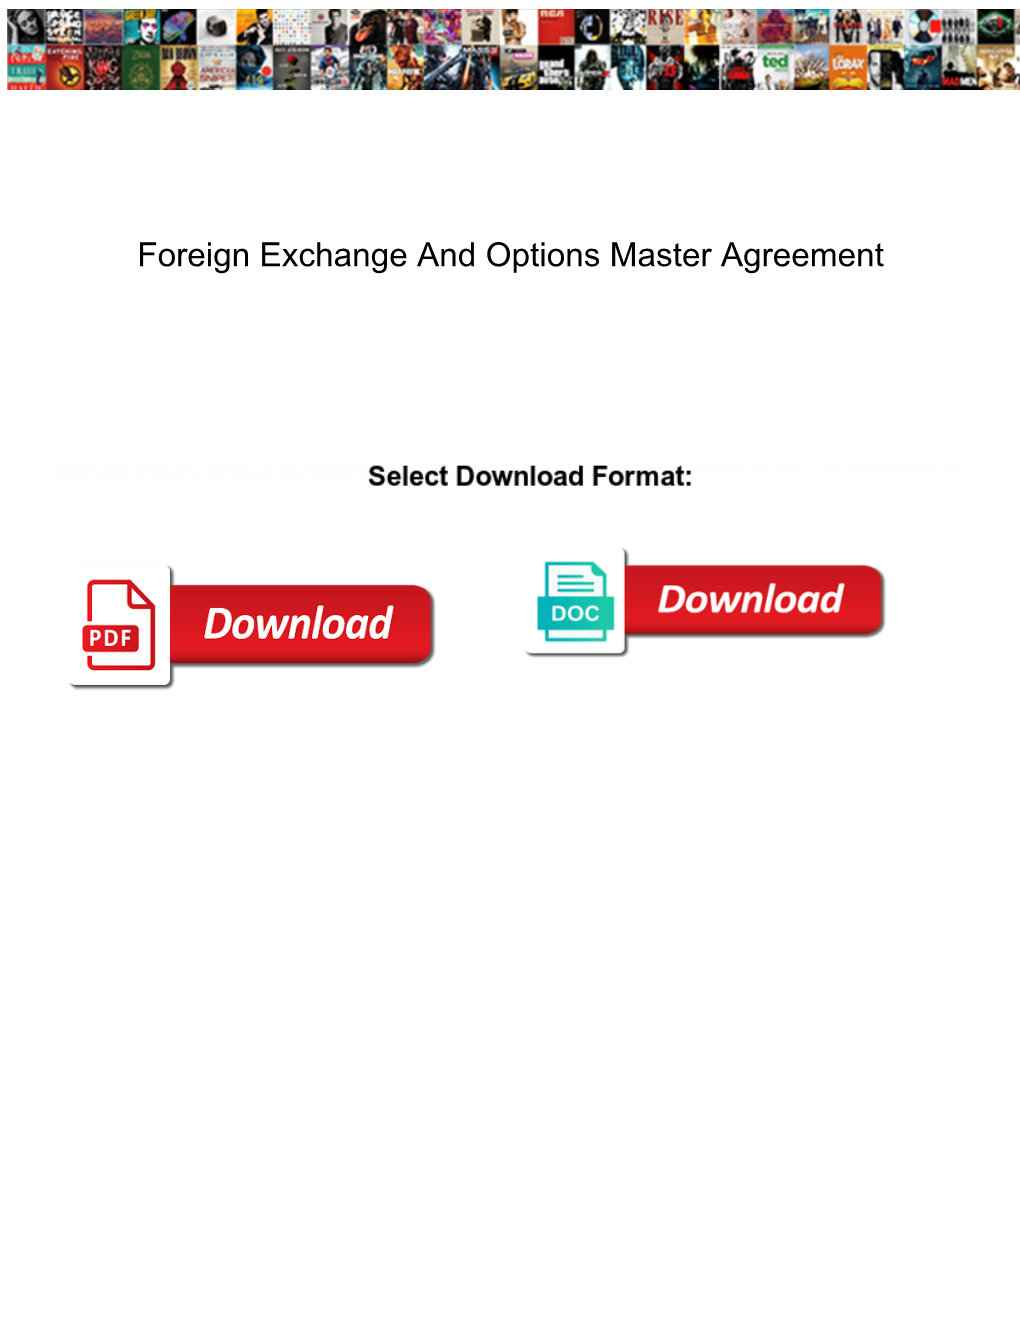 Foreign Exchange and Options Master Agreement